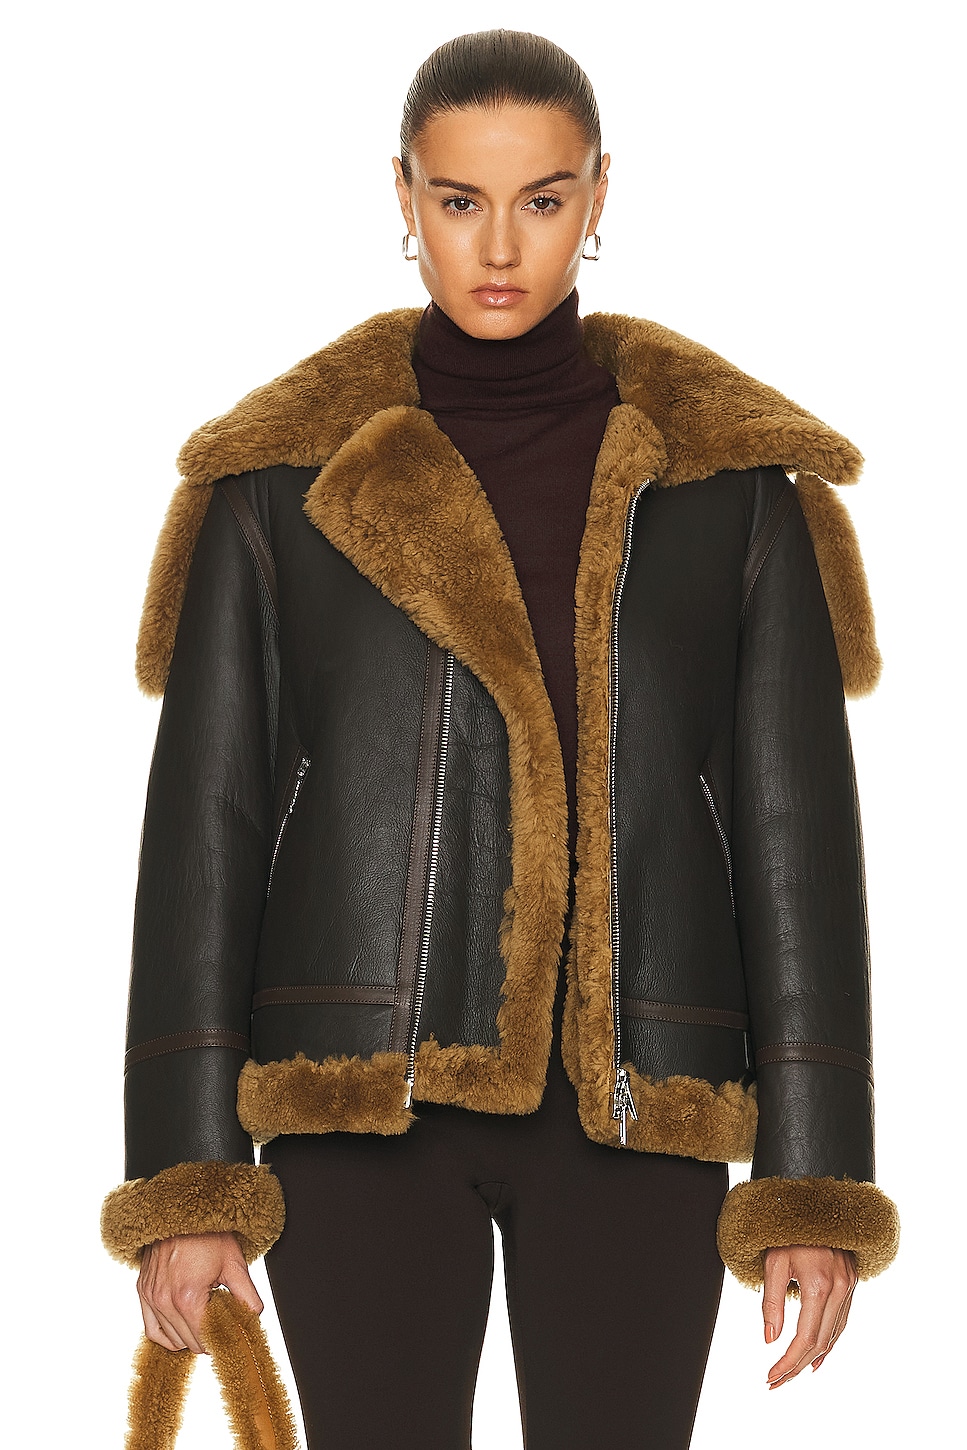 Burberry Shearling Coat in Otter | FWRD